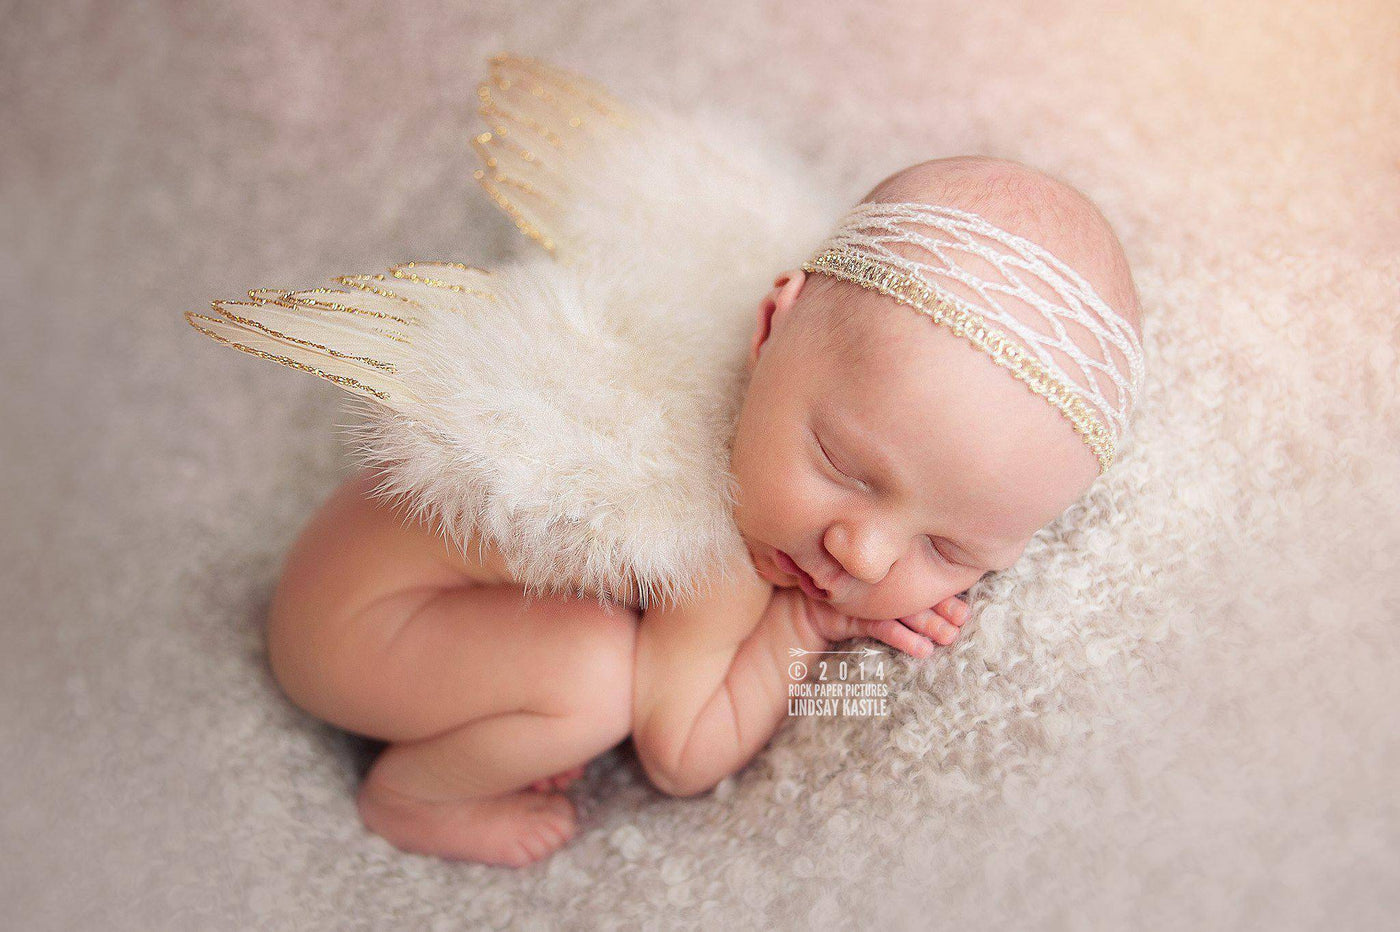 Glitter Tan Feather Angel Wings Newborn Baby Photography Prop - Beautiful Photo Props